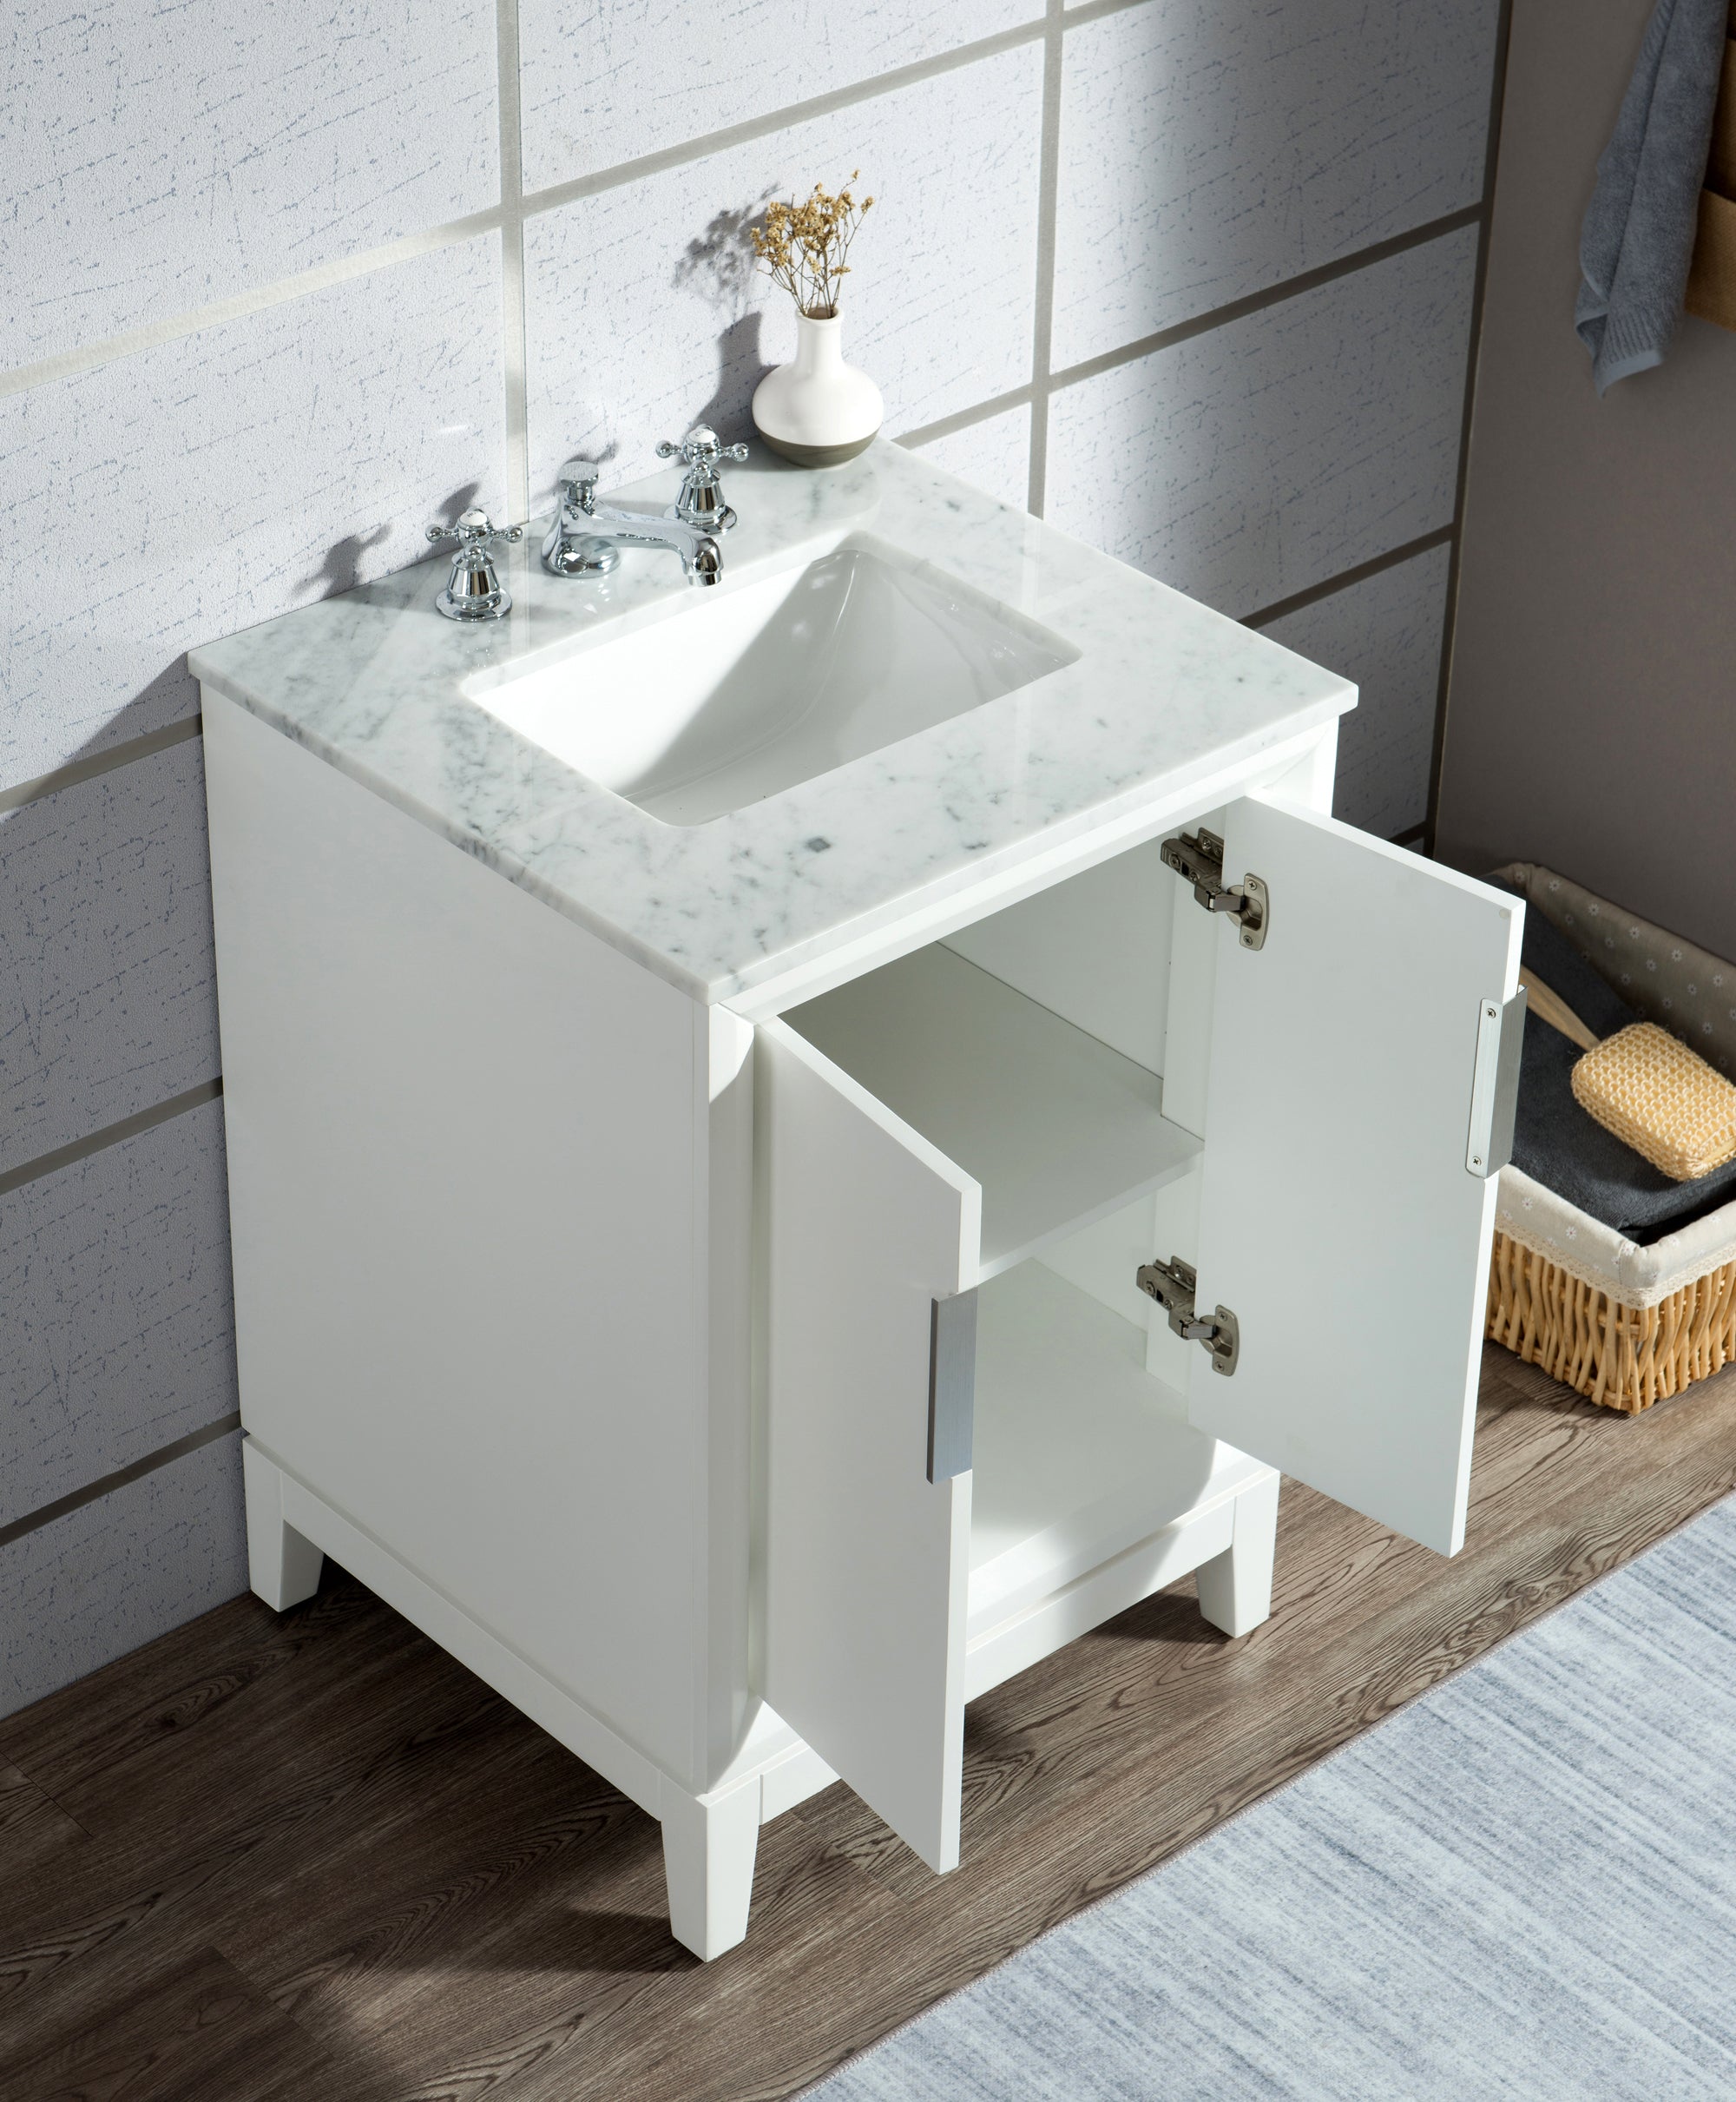 Water Creation | Elizabeth 24-Inch Single Sink Carrara White Marble Vanity In Pure White With Matching Mirror(s) and F2-0009-01-BX Lavatory Faucet(s) | EL24CW01PW-R21BX0901